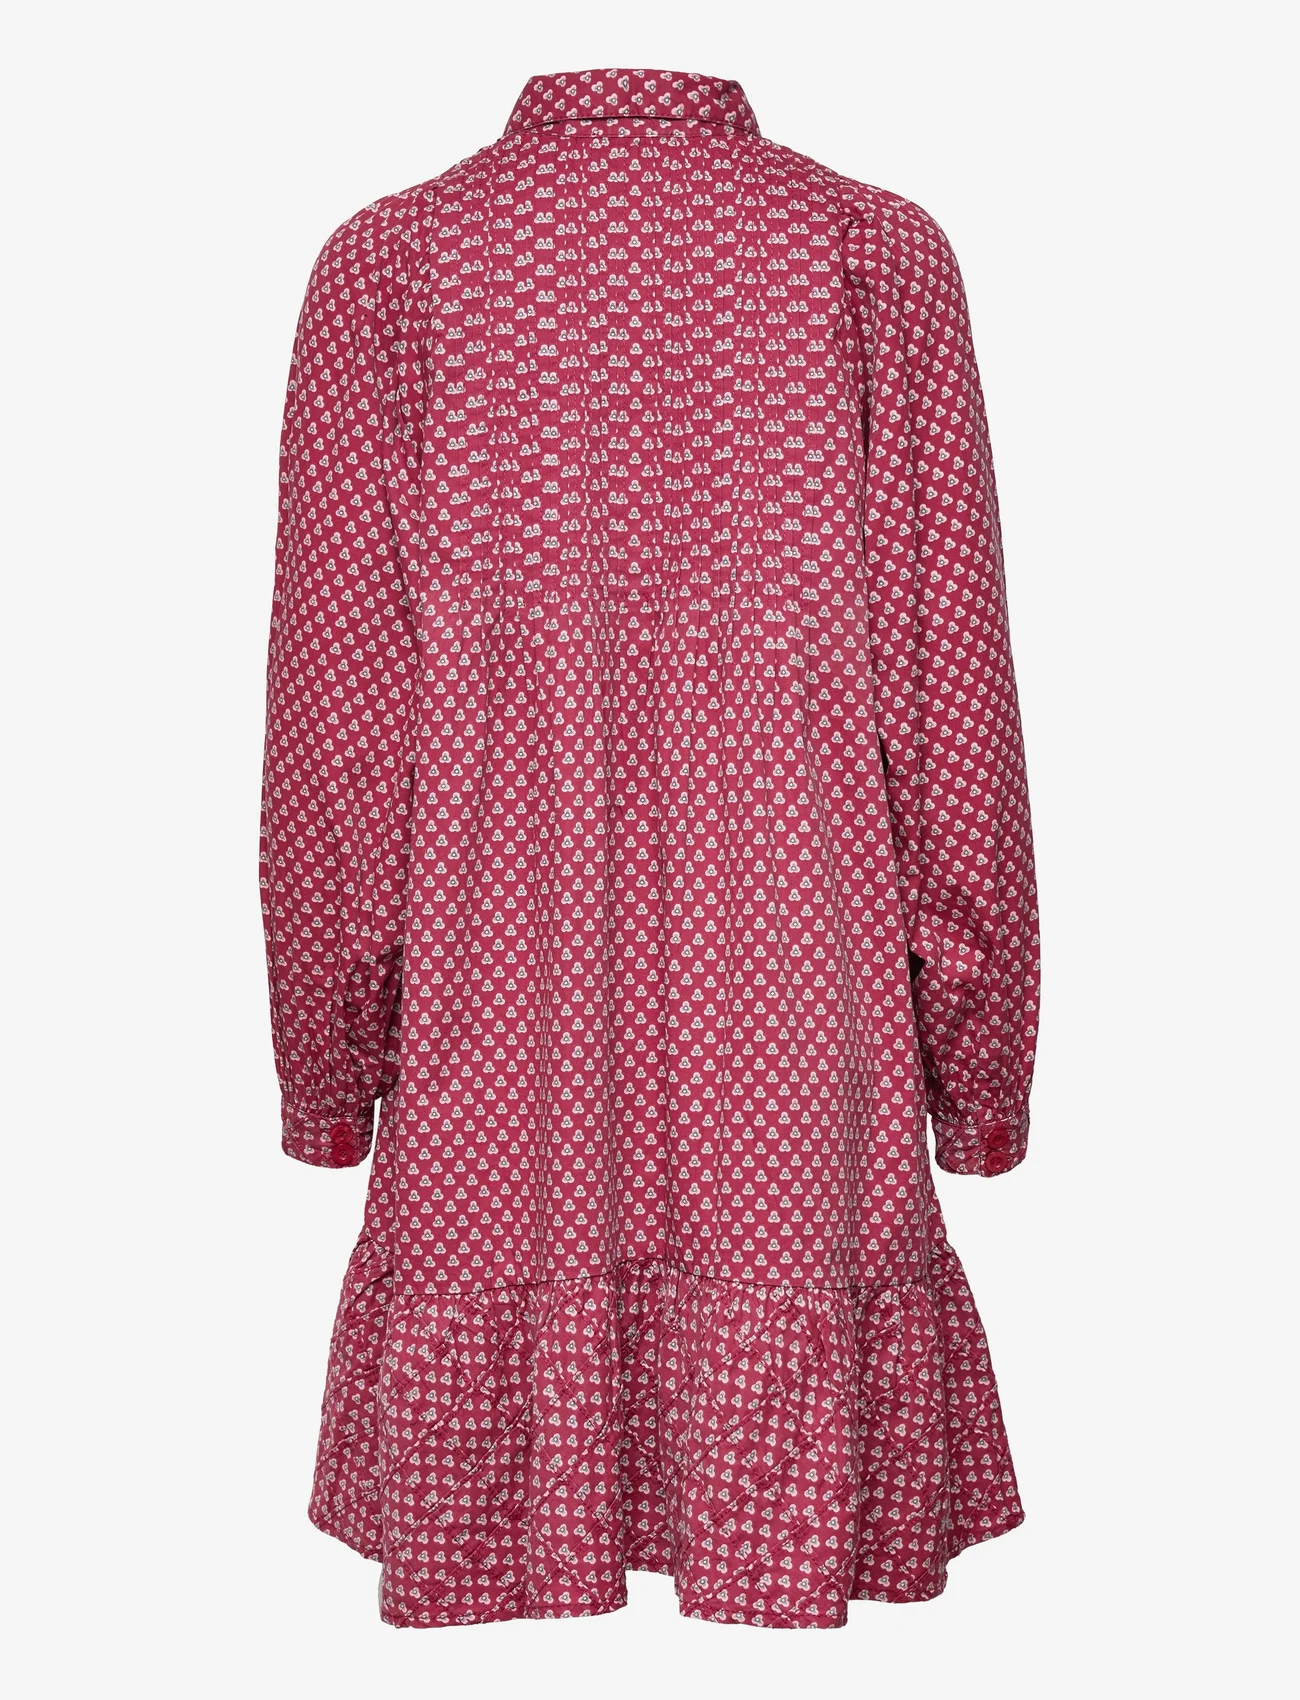 by Ti Mo - Structured Cotton Shift Dress - shirt dresses - floral dots - 1